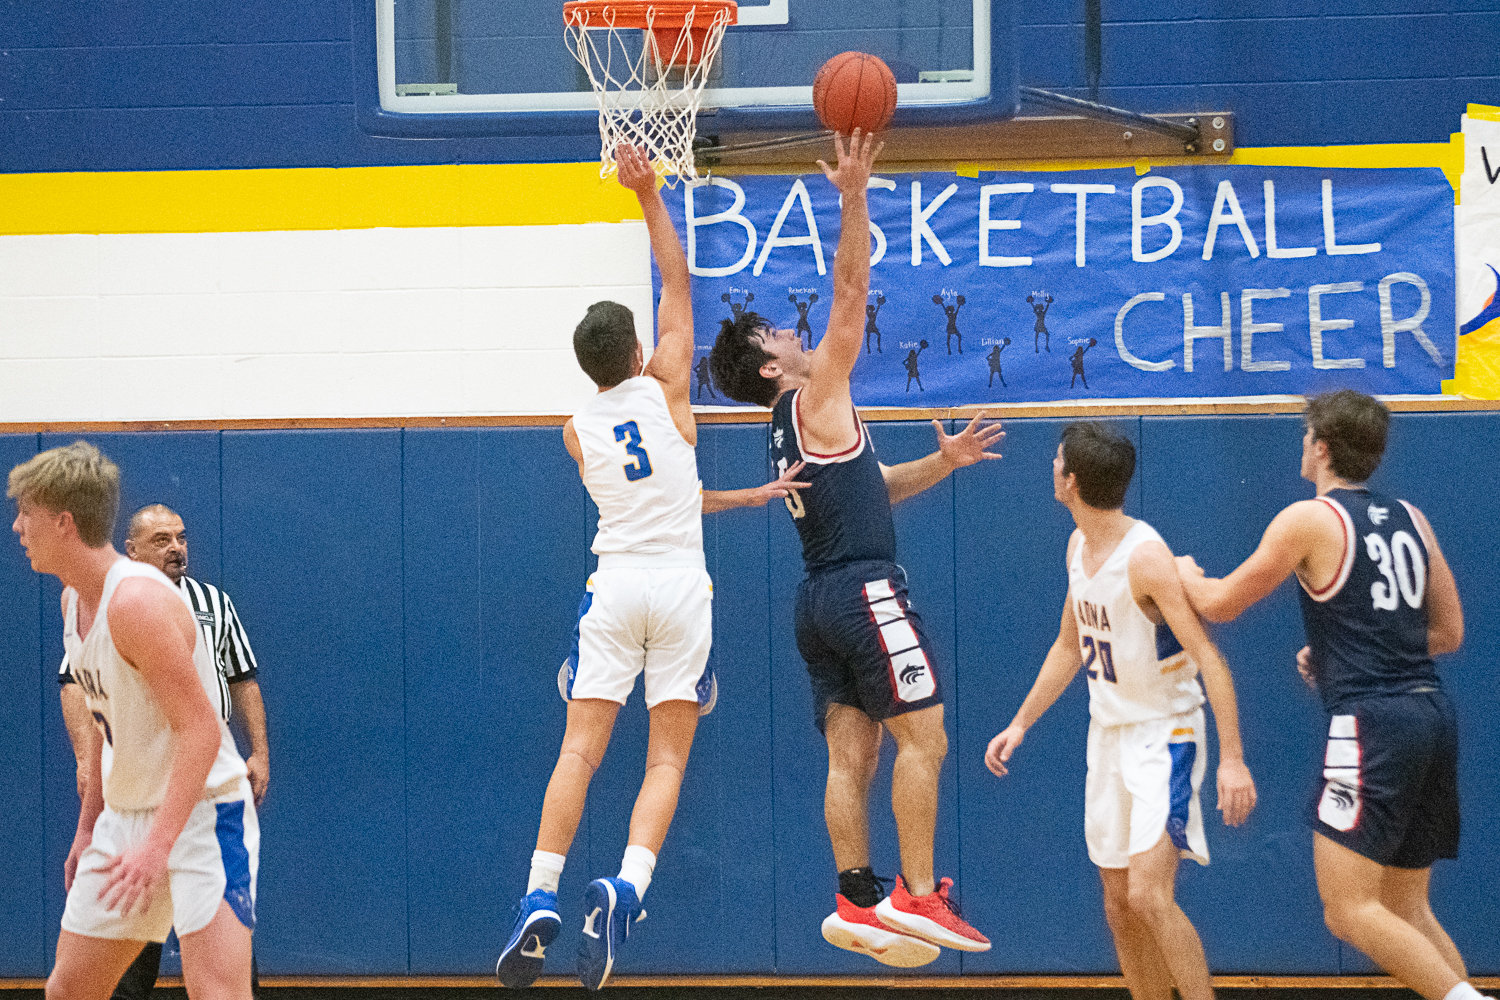 Keagan Rongen goes up for a reverse layup during the first half of Black Hills' 67-60 loss at Adna on Nov. 29.